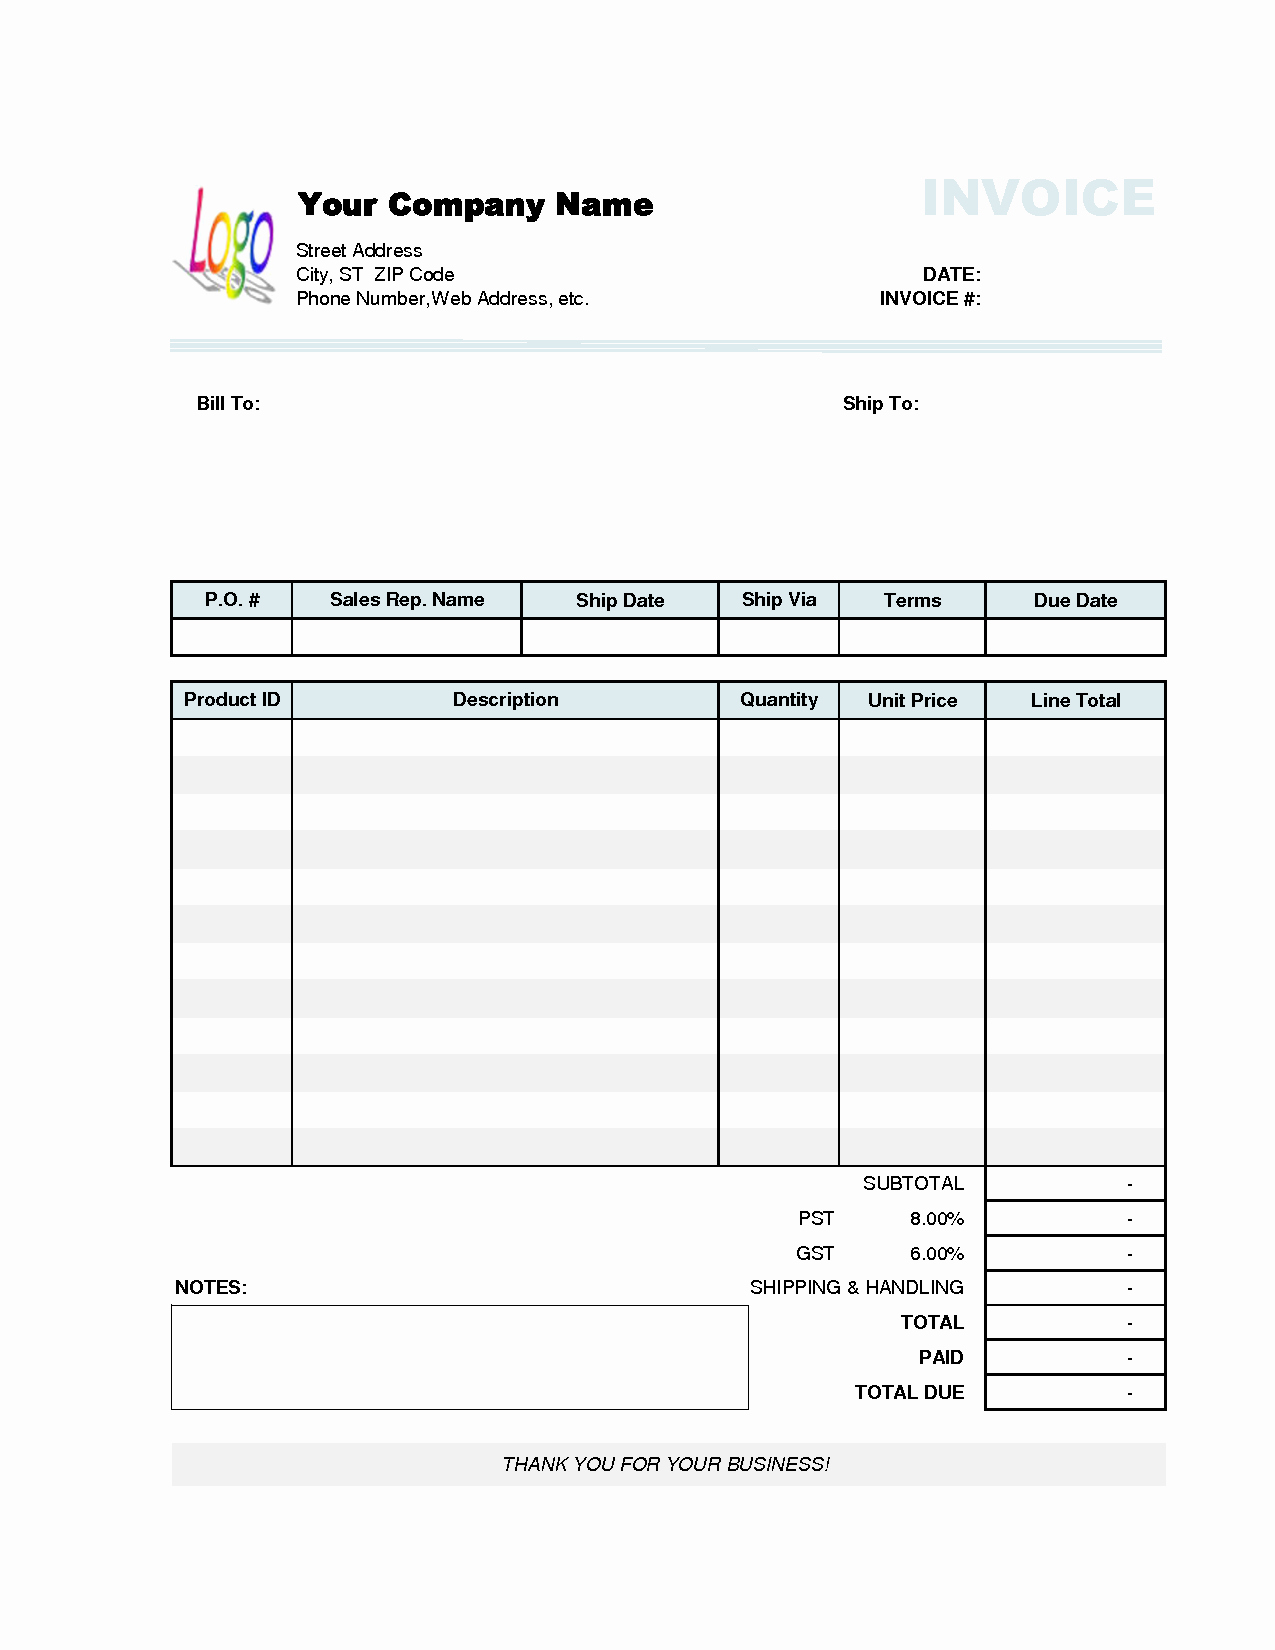 Free Excel Invoice Template Beautiful Invoice Template Excel 2010